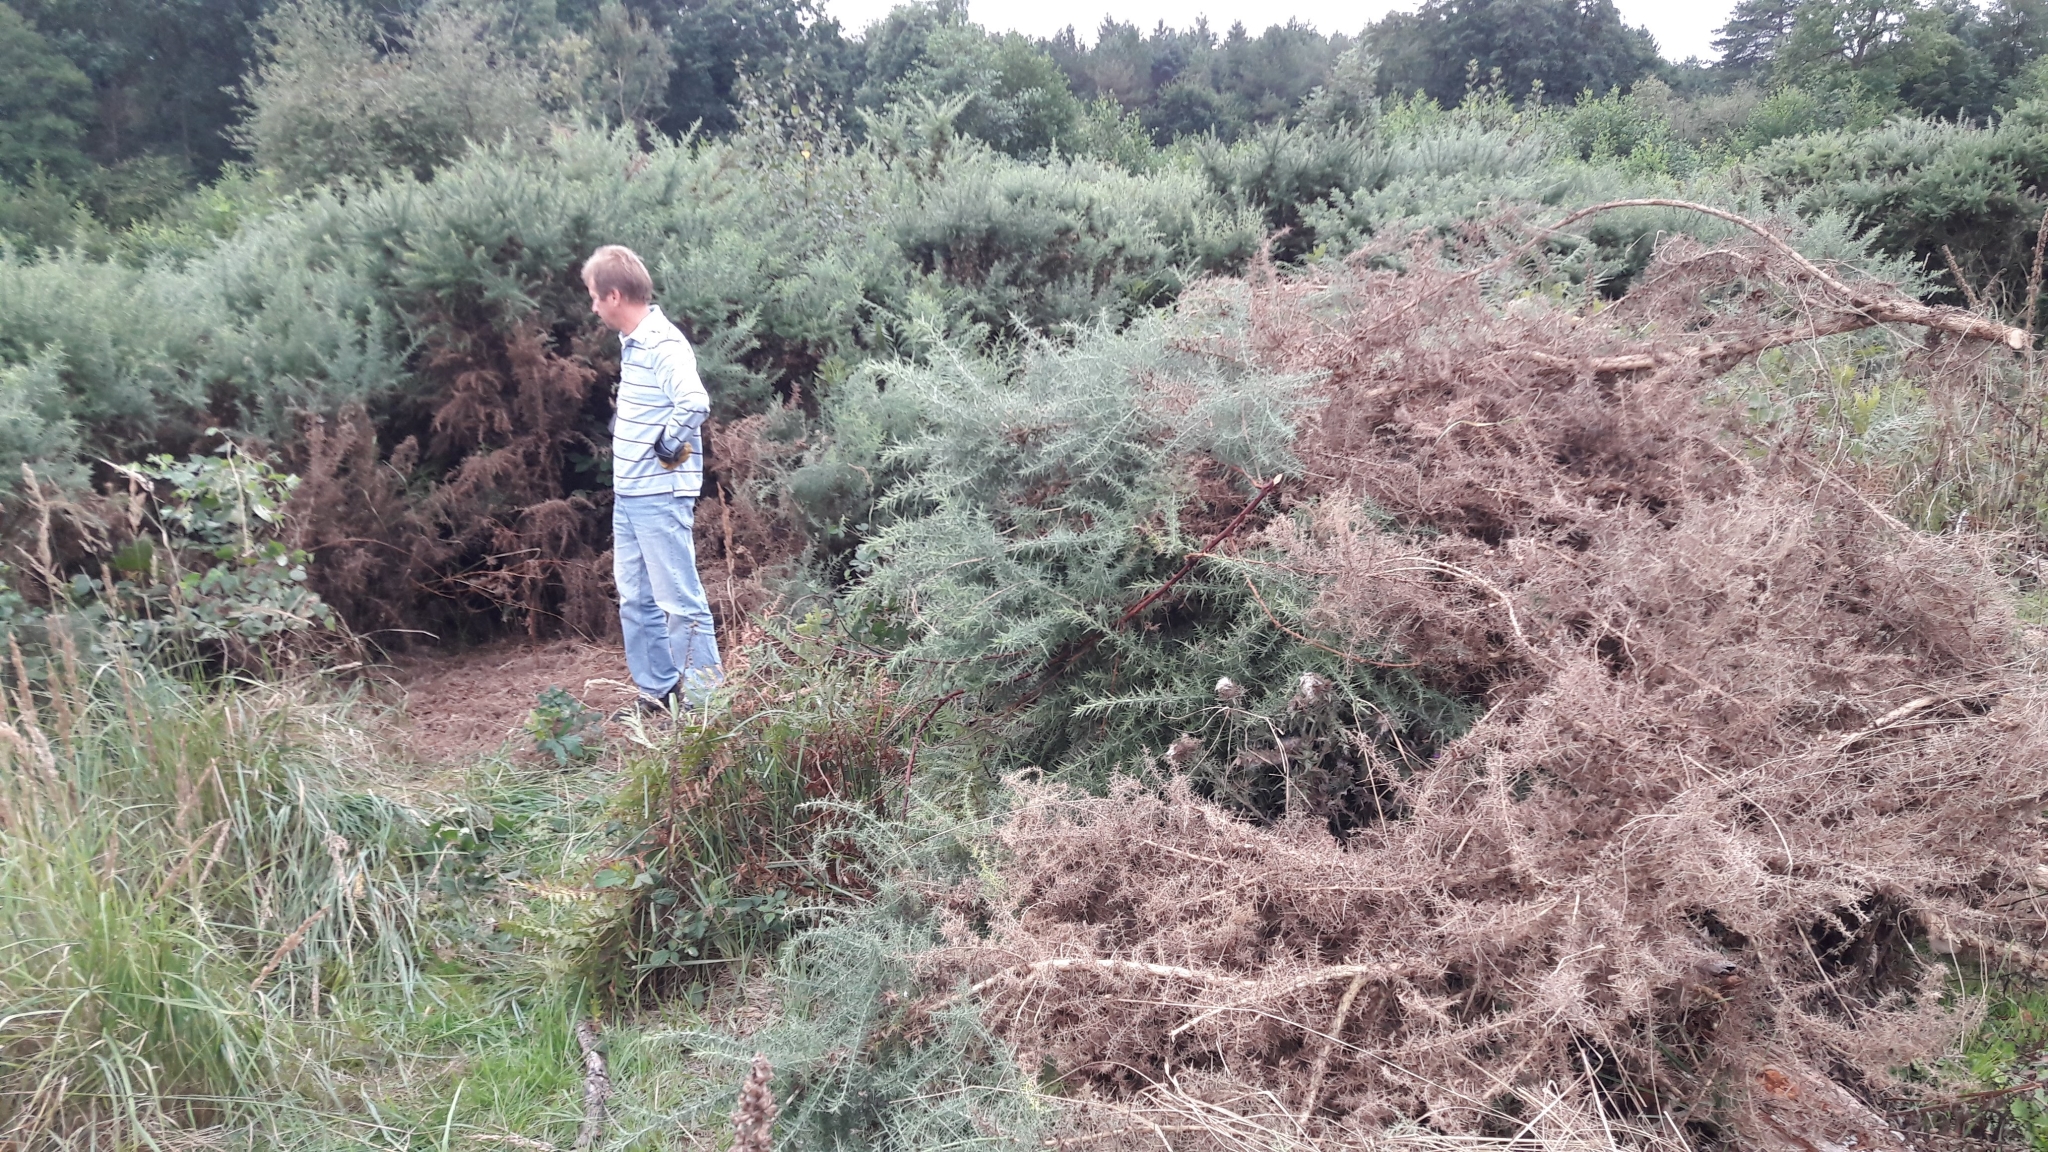 A photo from the FoTF Conservation Event - August 2018 - Gorse Removal at Hockham Hills & Holes : A volunteer surveys the work done so far